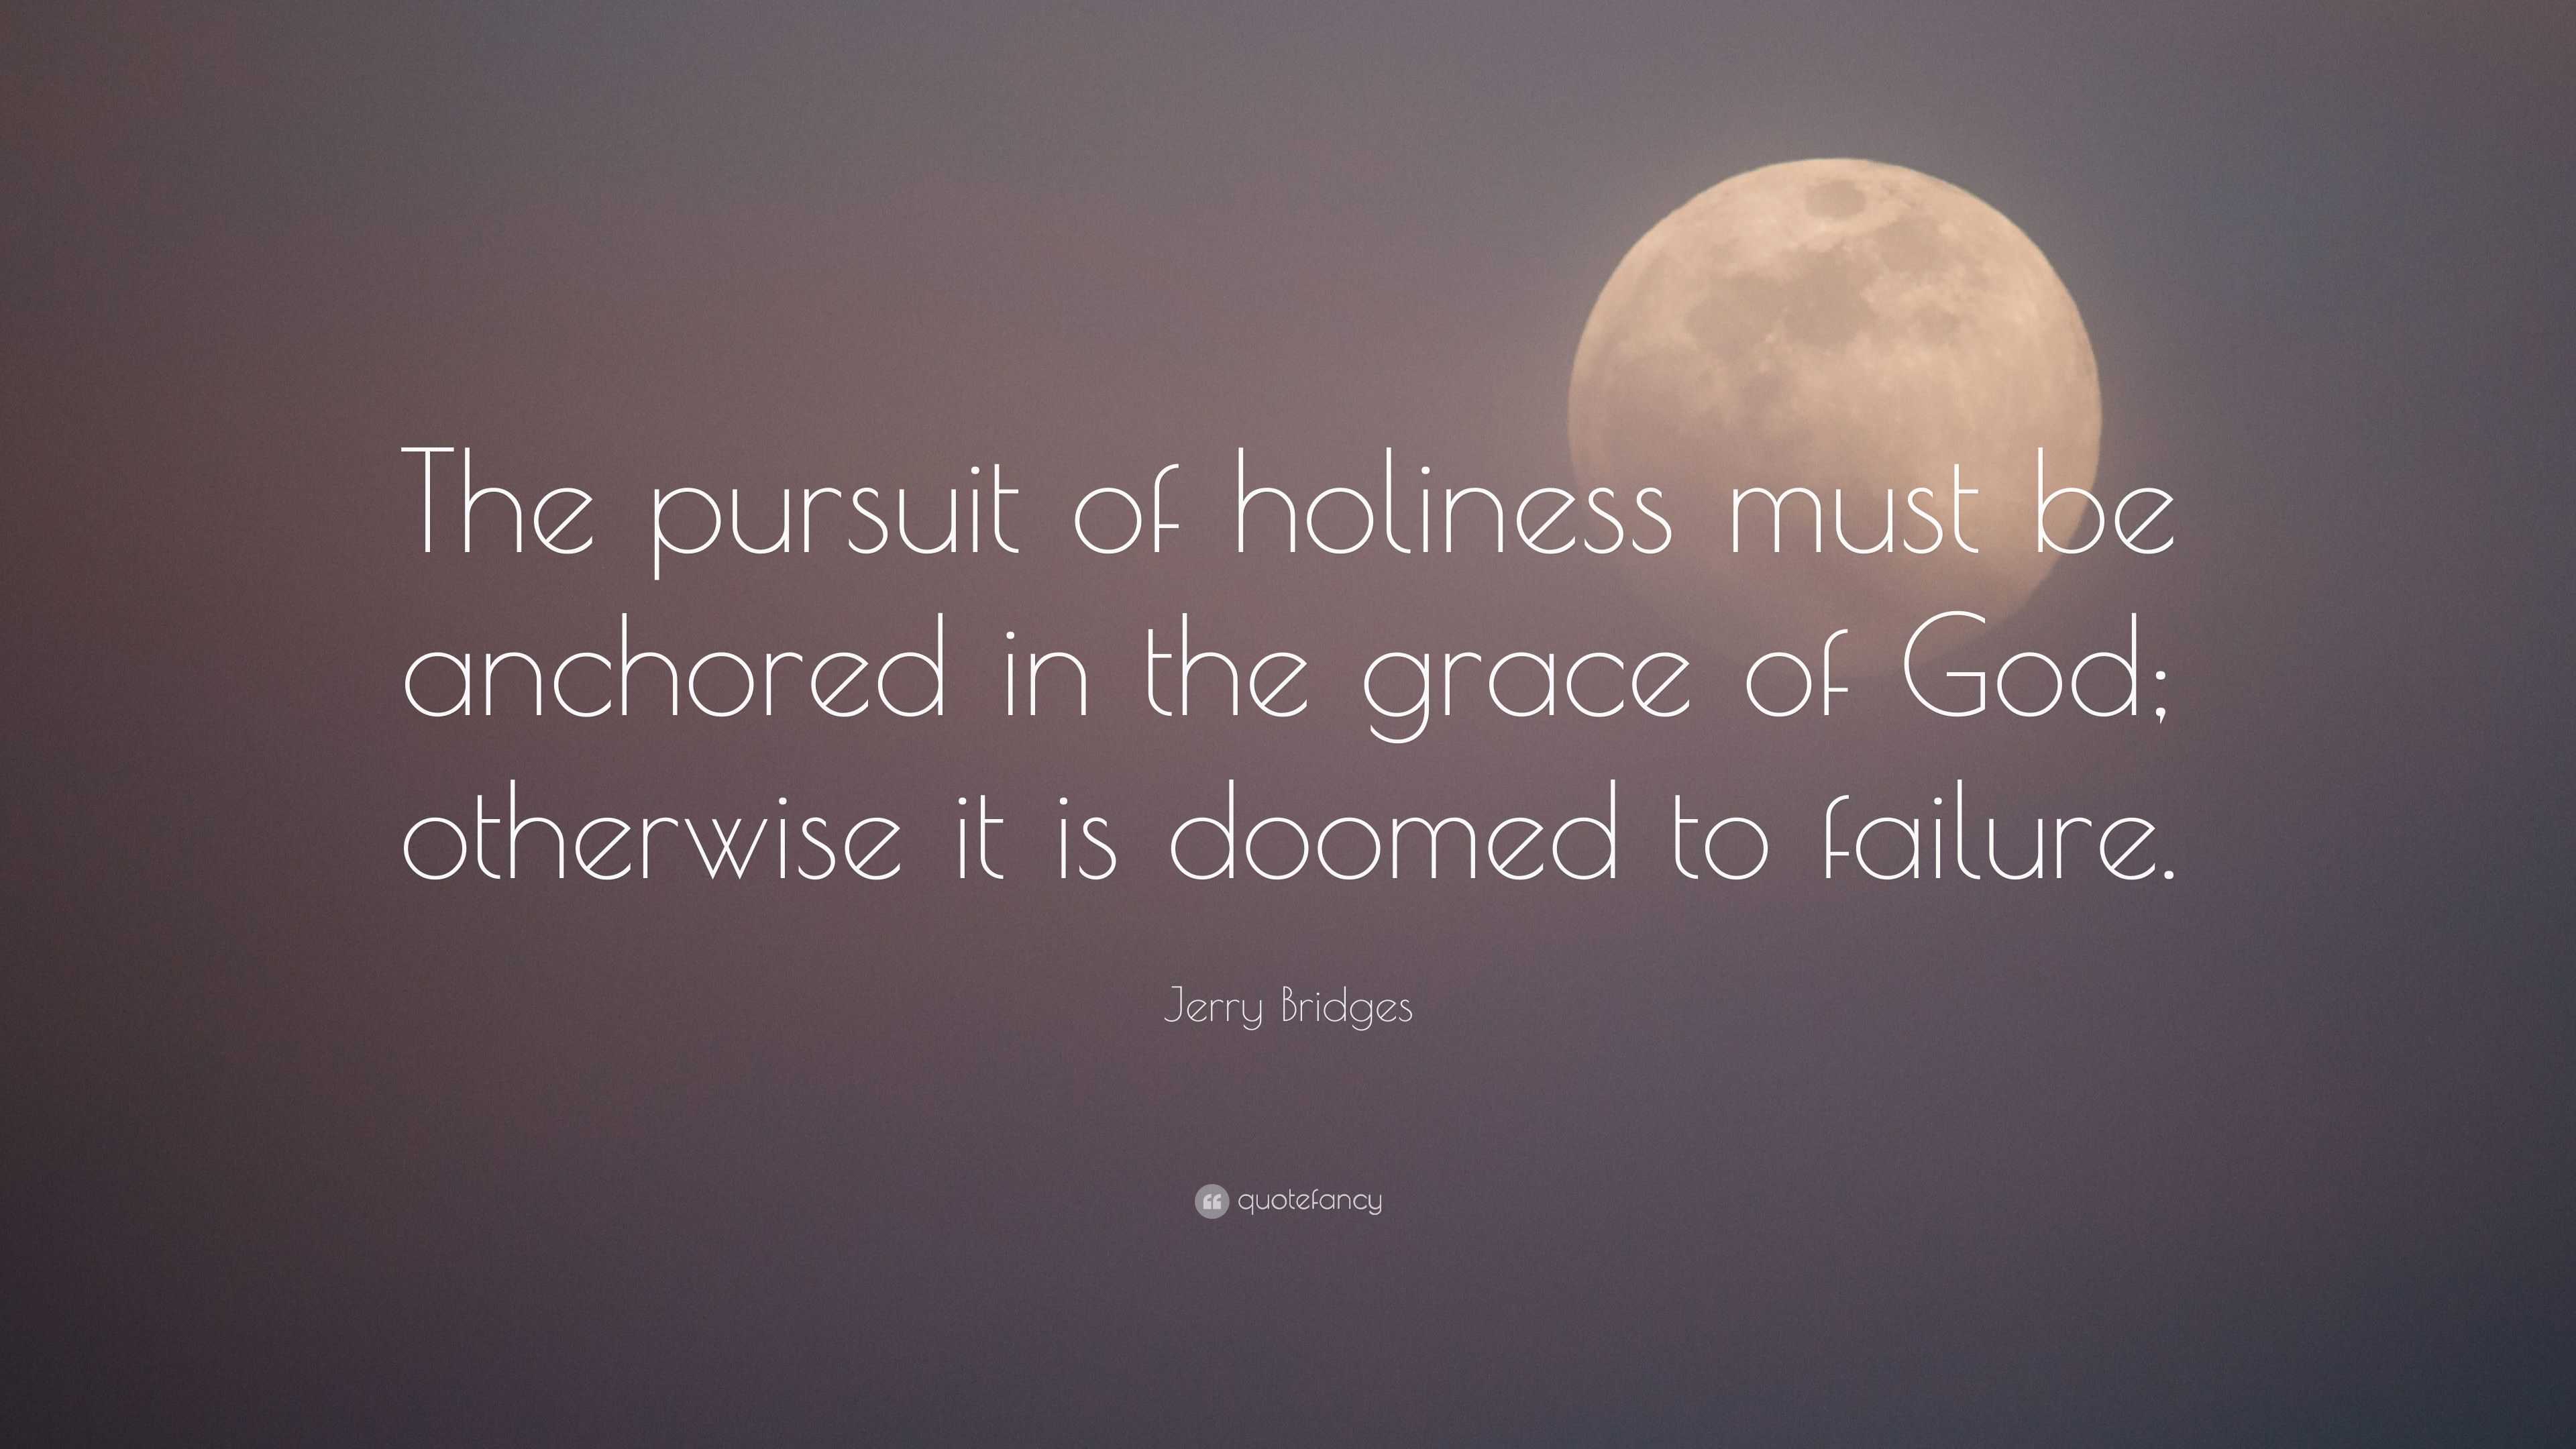 Jerry Bridges Quote: “The pursuit of holiness must be anchored in the ...